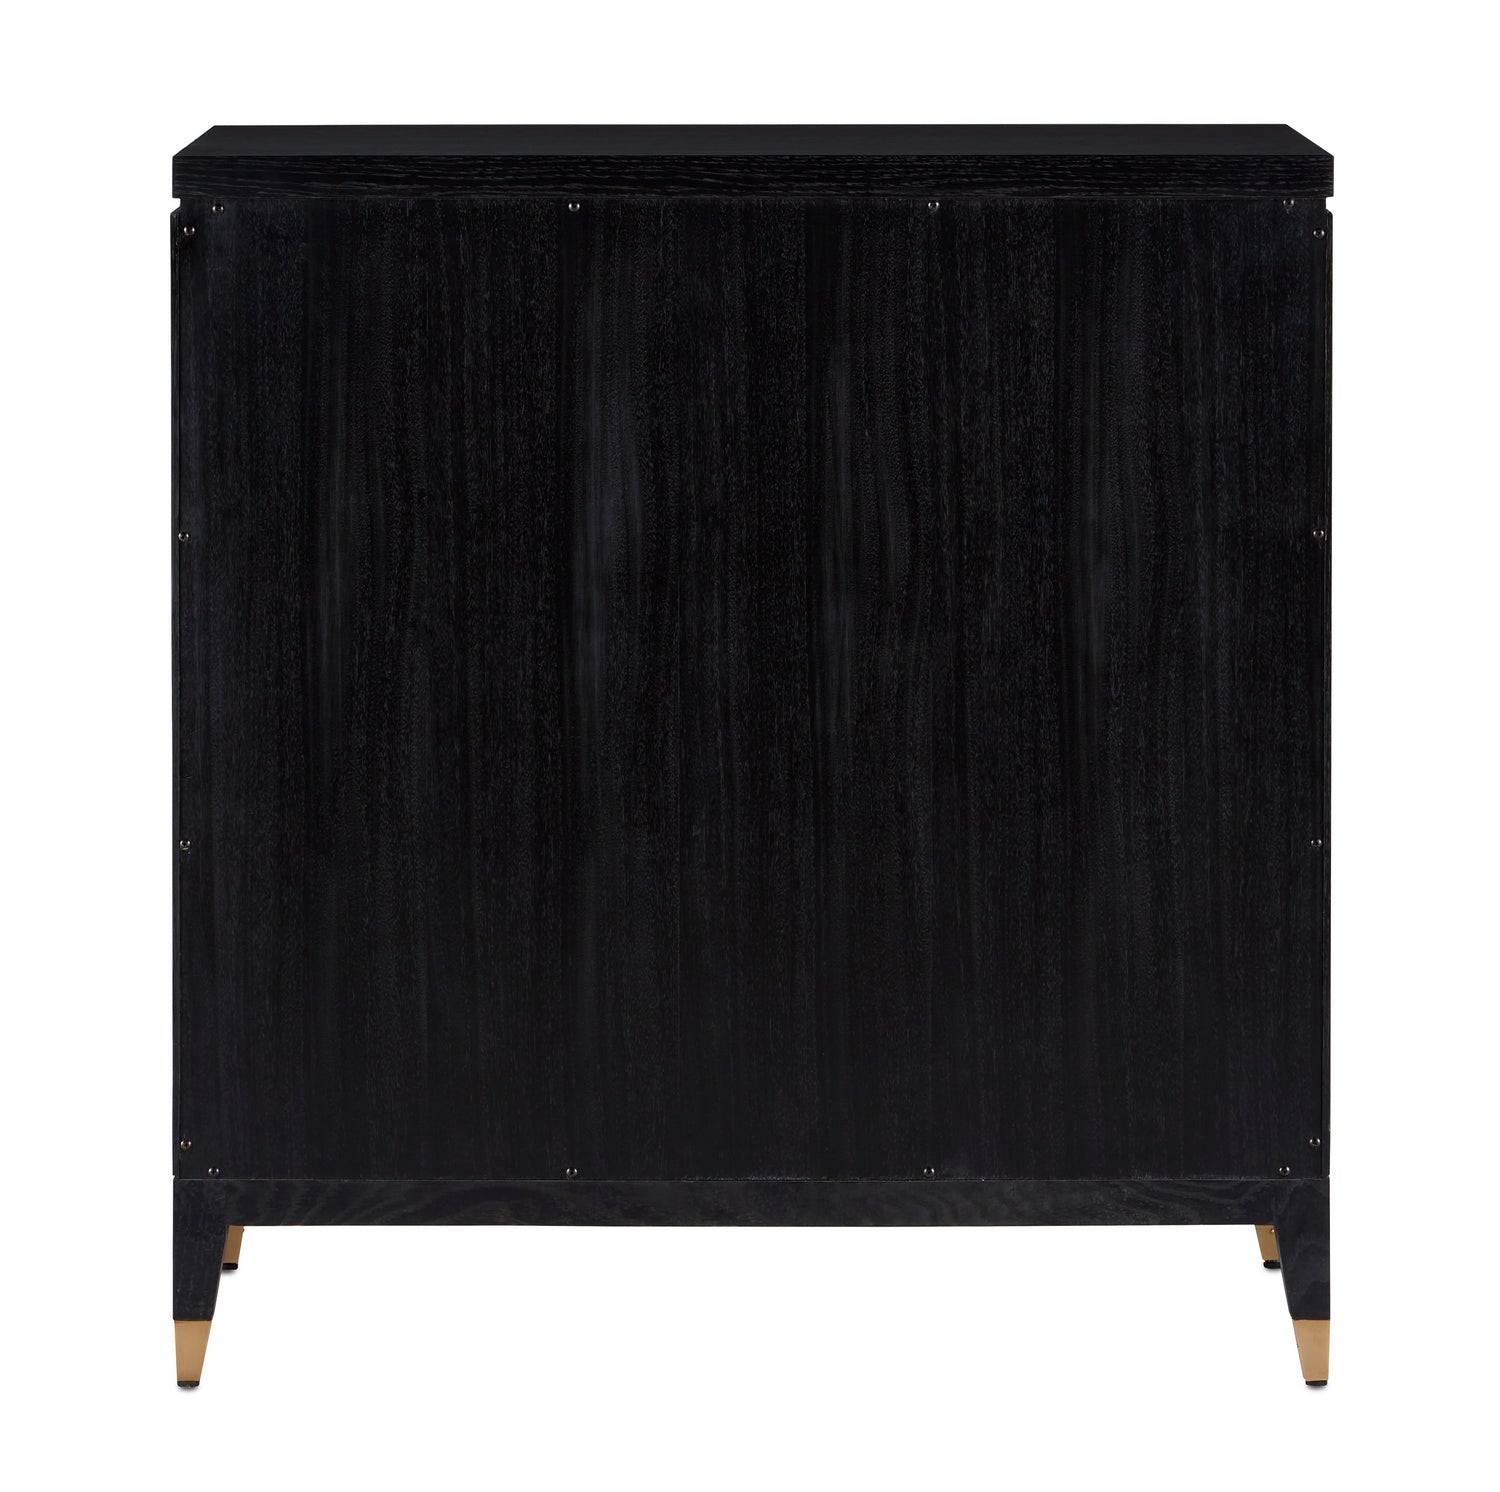 Bar Cabinet from the Sergio collection in Chestnut Burl/Black/Ash/Brass finish